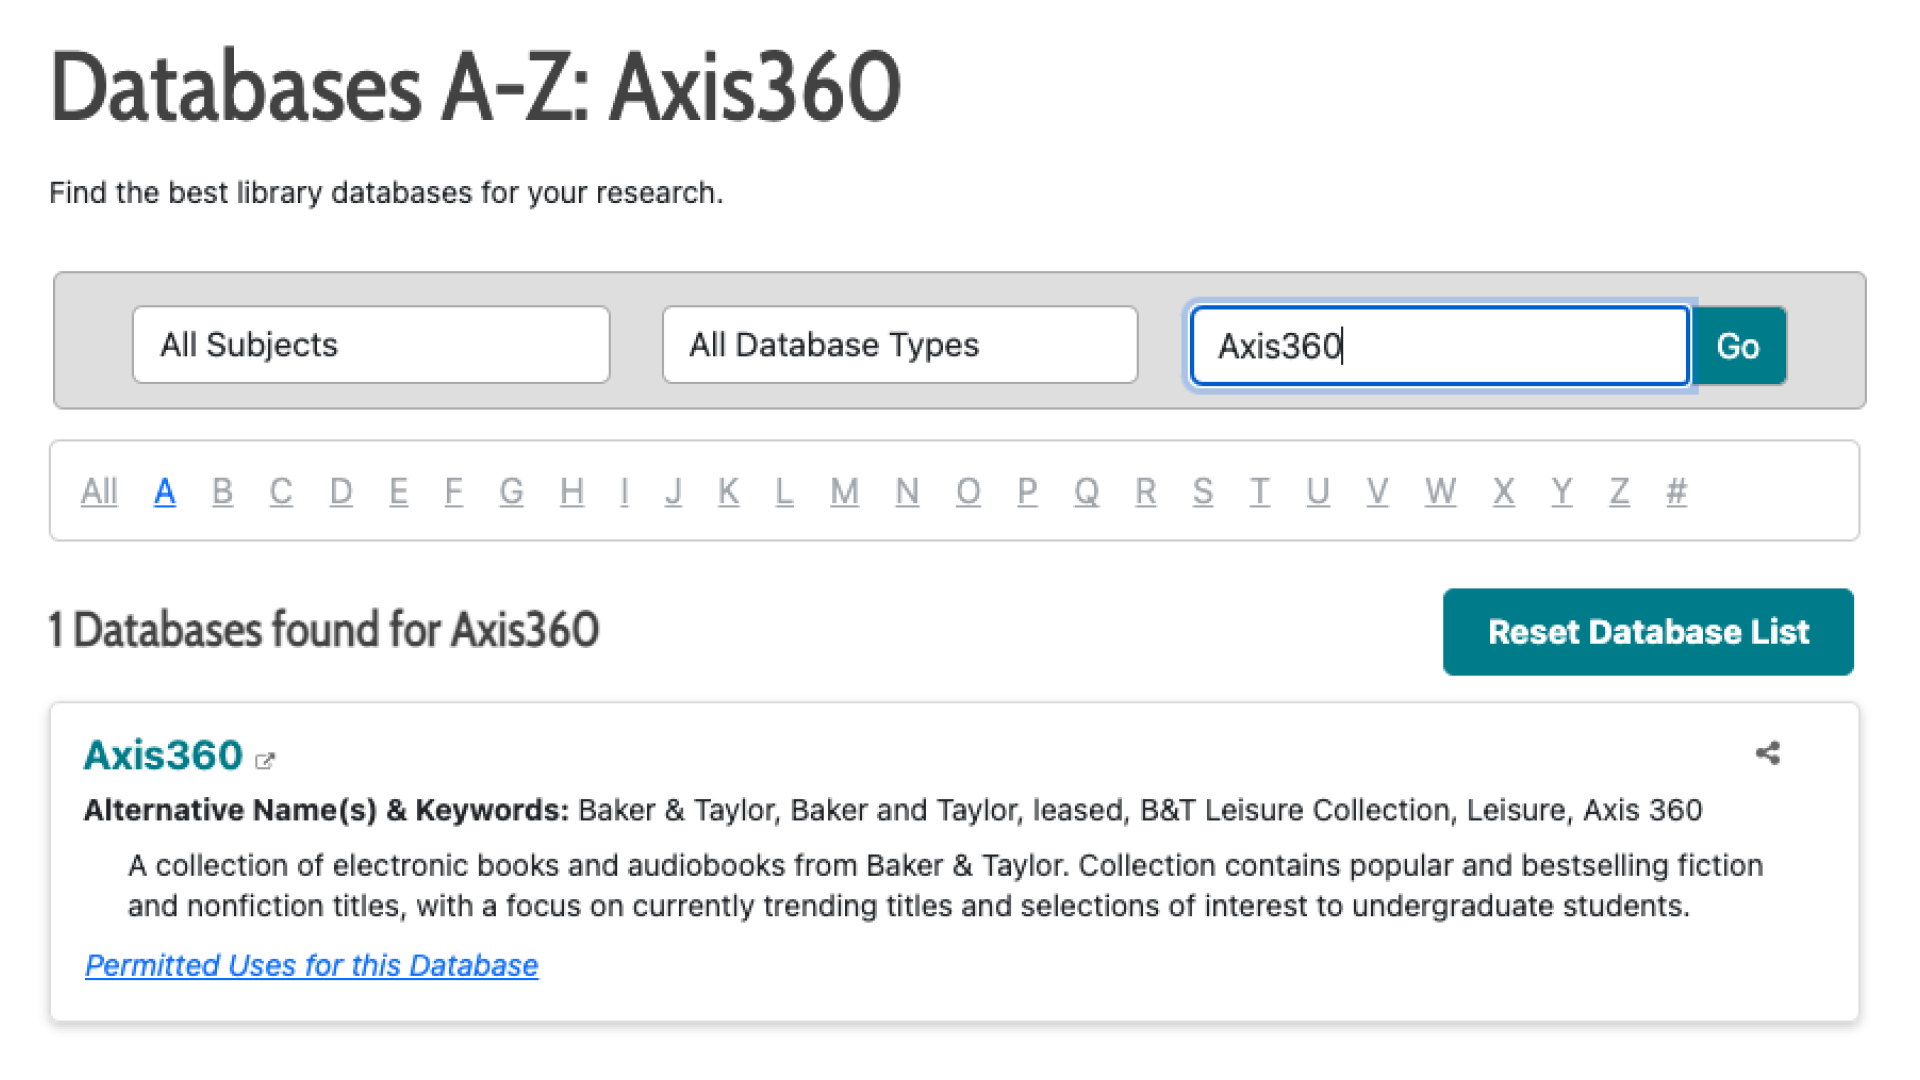 A screenshot of the Axis360 entry in the databases list